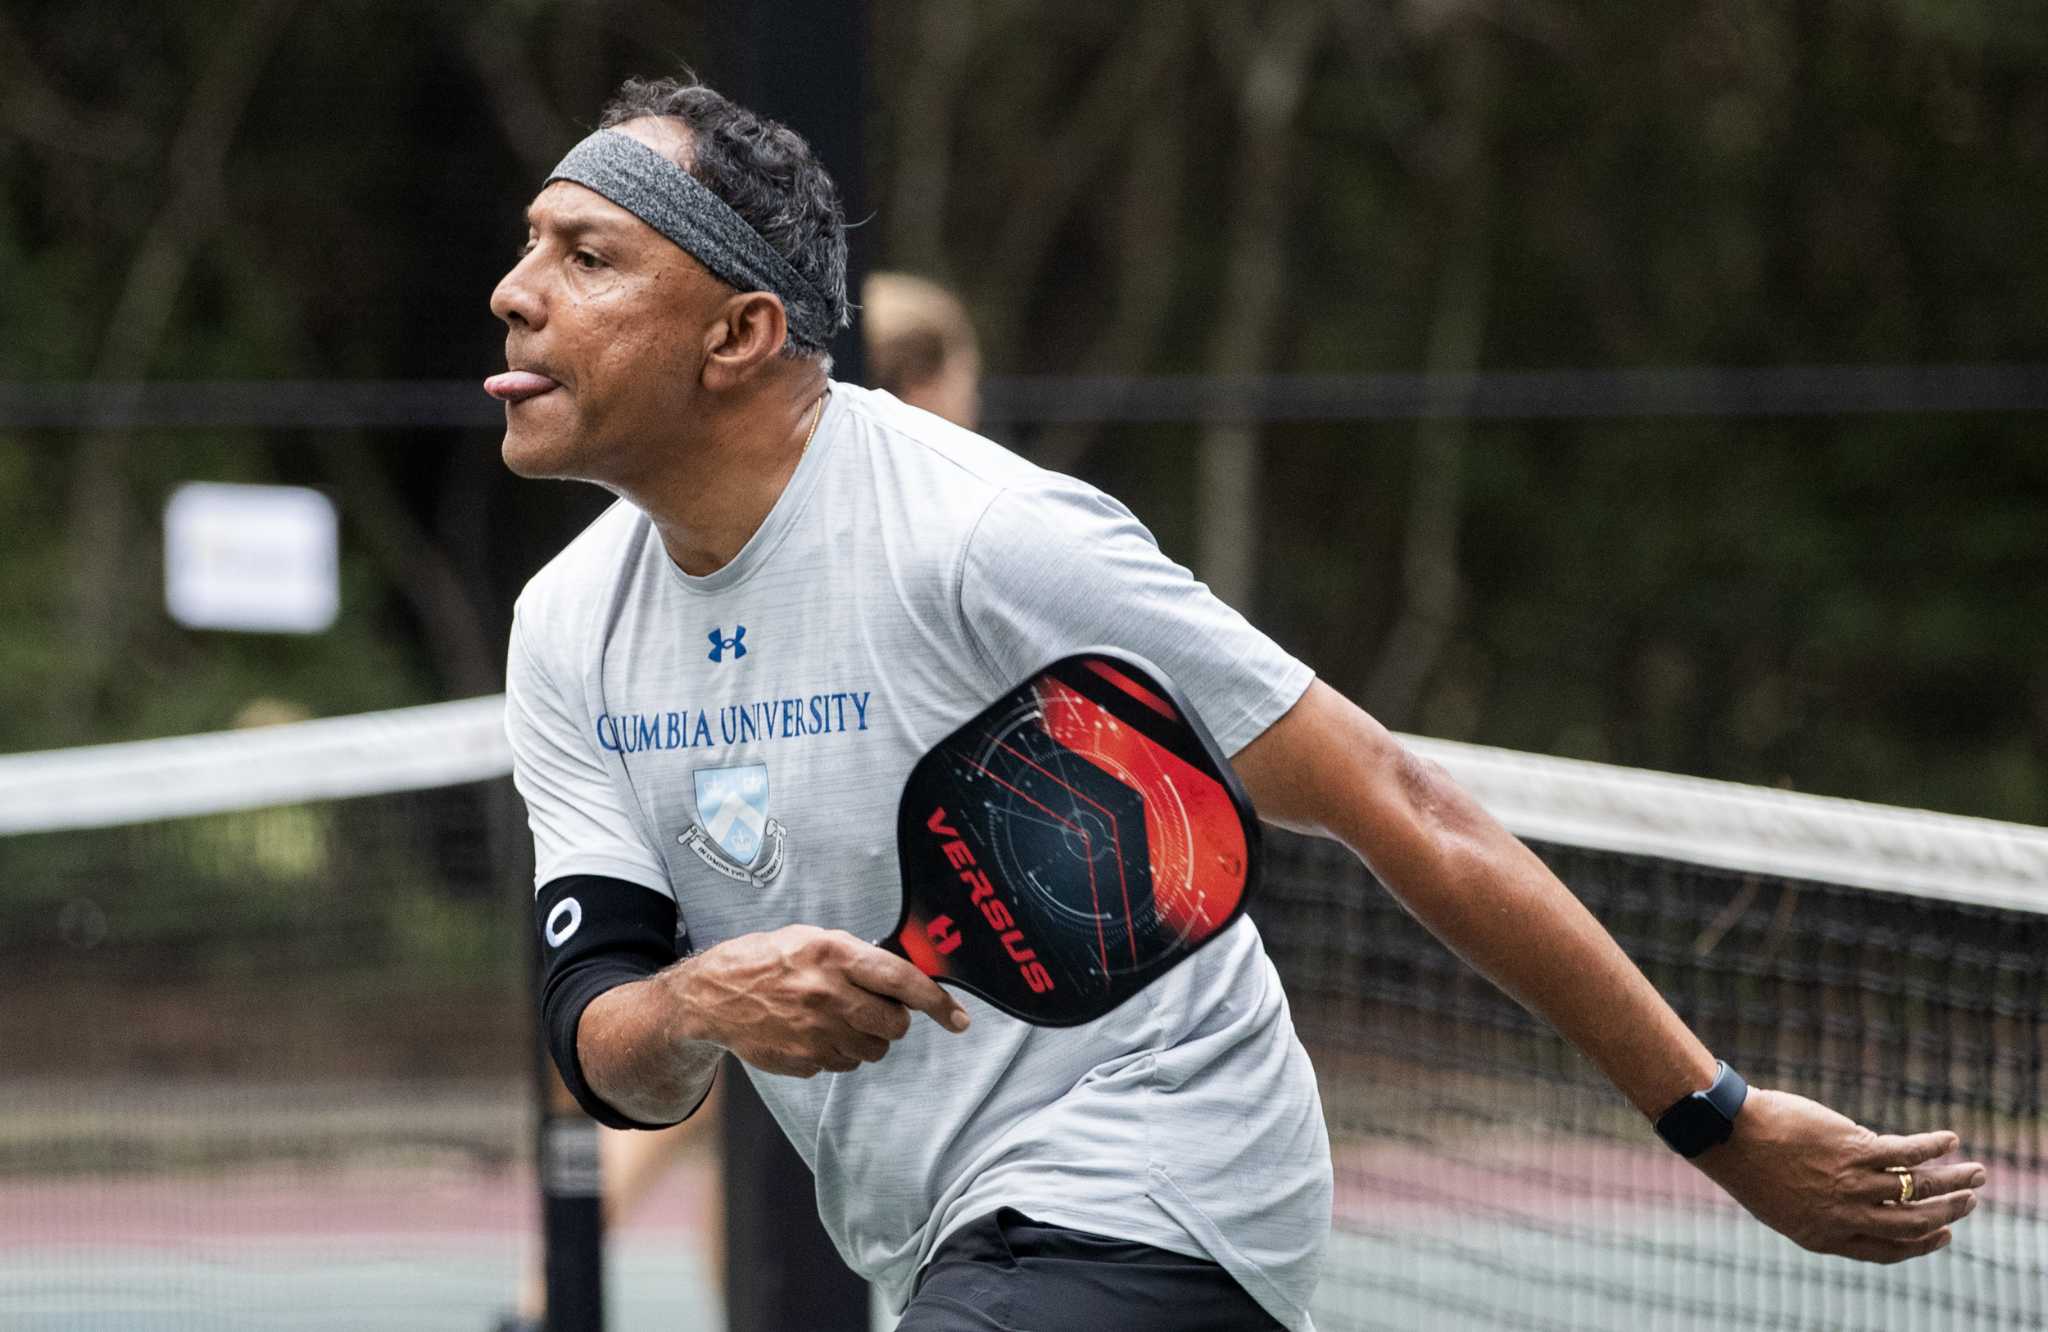 The Woodlands opens first of its kind $650K pickleball courts